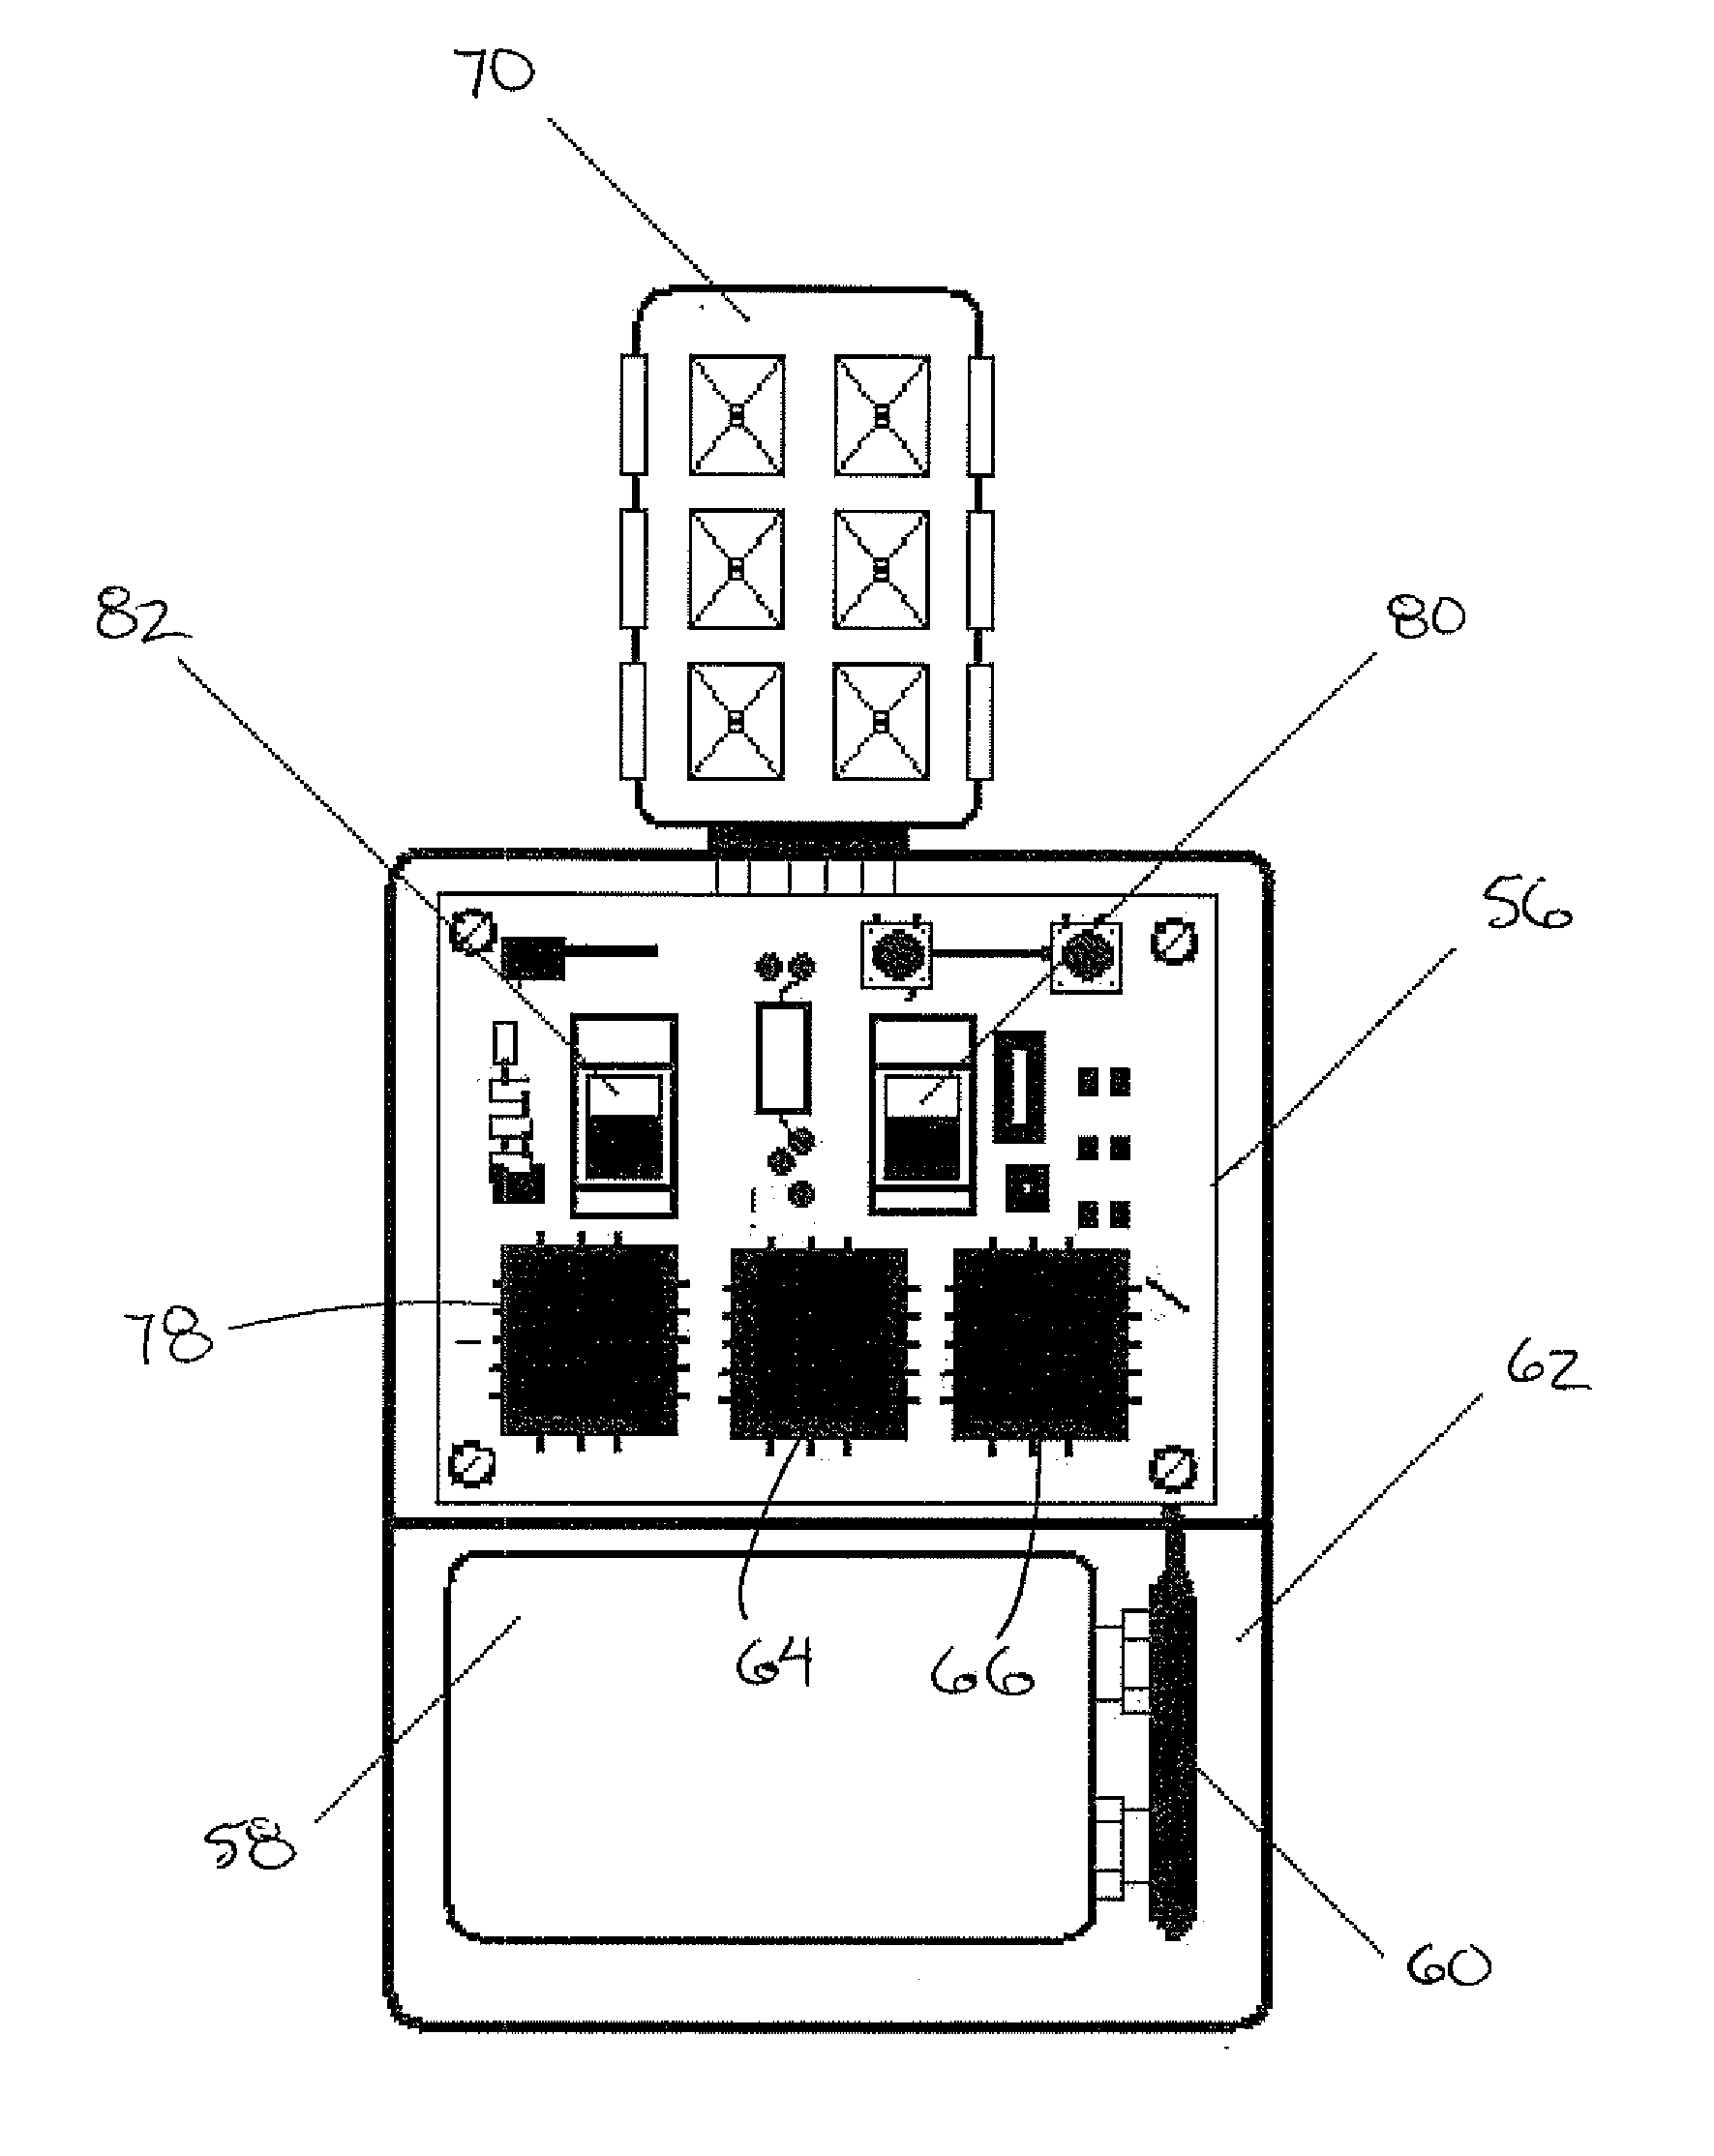 Adapter for Communicating Between an Anti-Personnel Training Device and a User Worn Monitoring Device